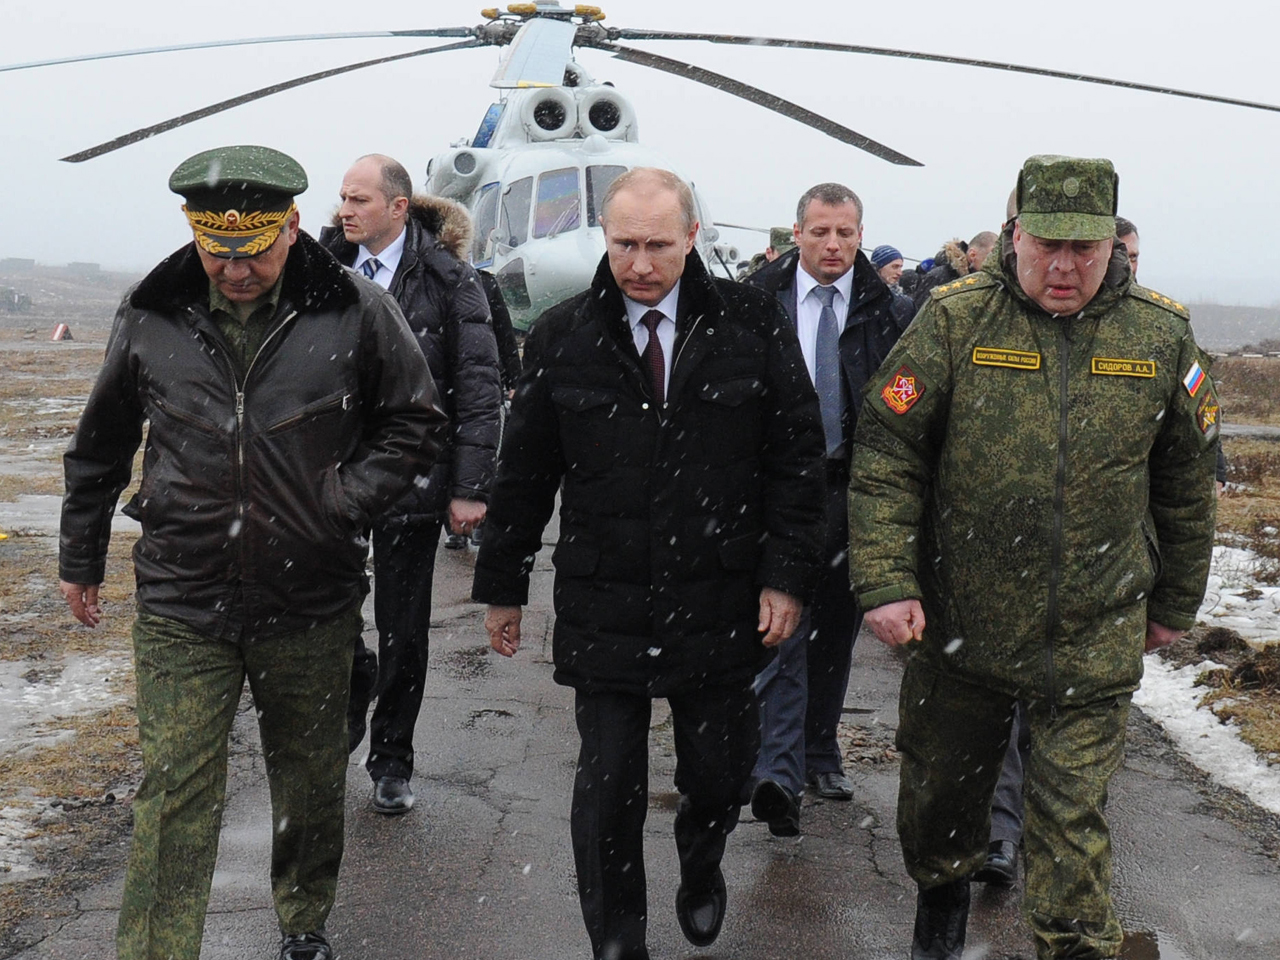 Russia Leader Vladimir Putin Says He Ll Protect Russians In Ukraine By Any Means But Hopes